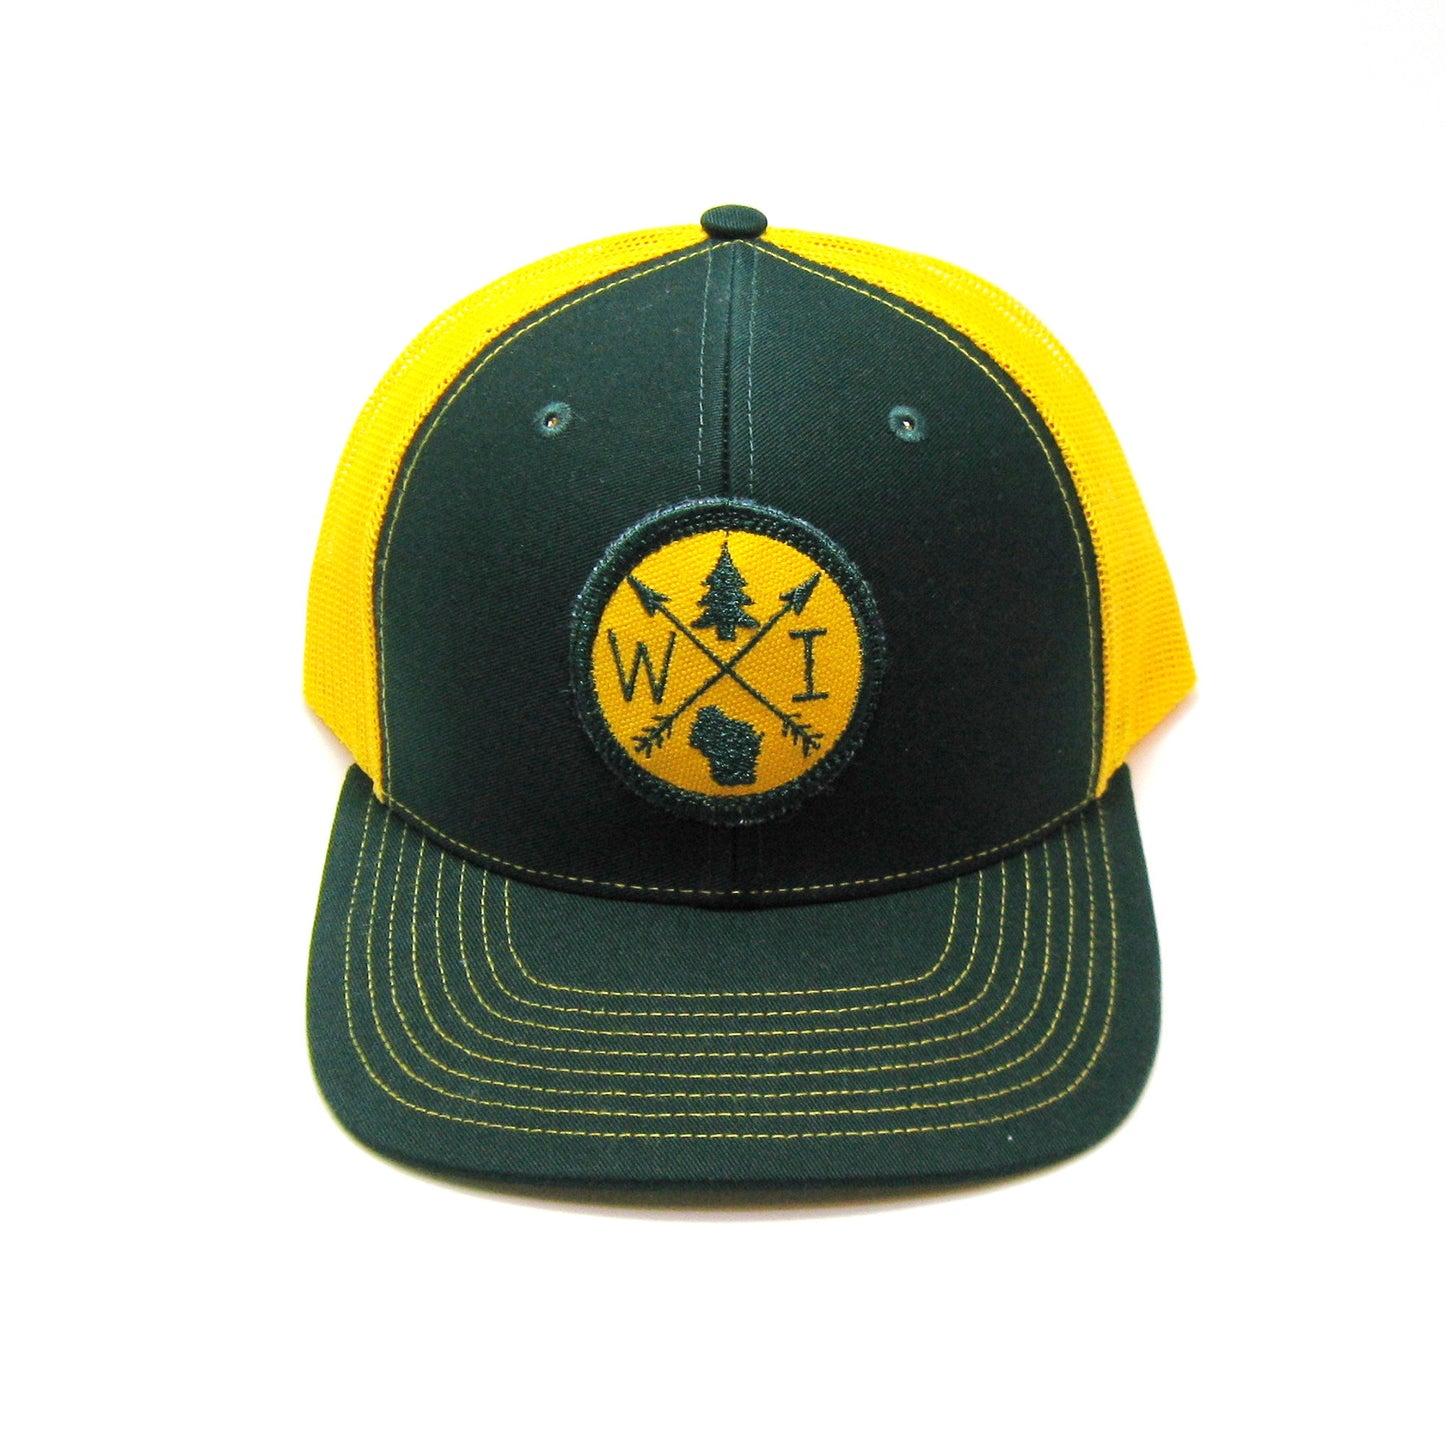 Wisconsin Hat - Green and Gold Snapback with Arrow Patch